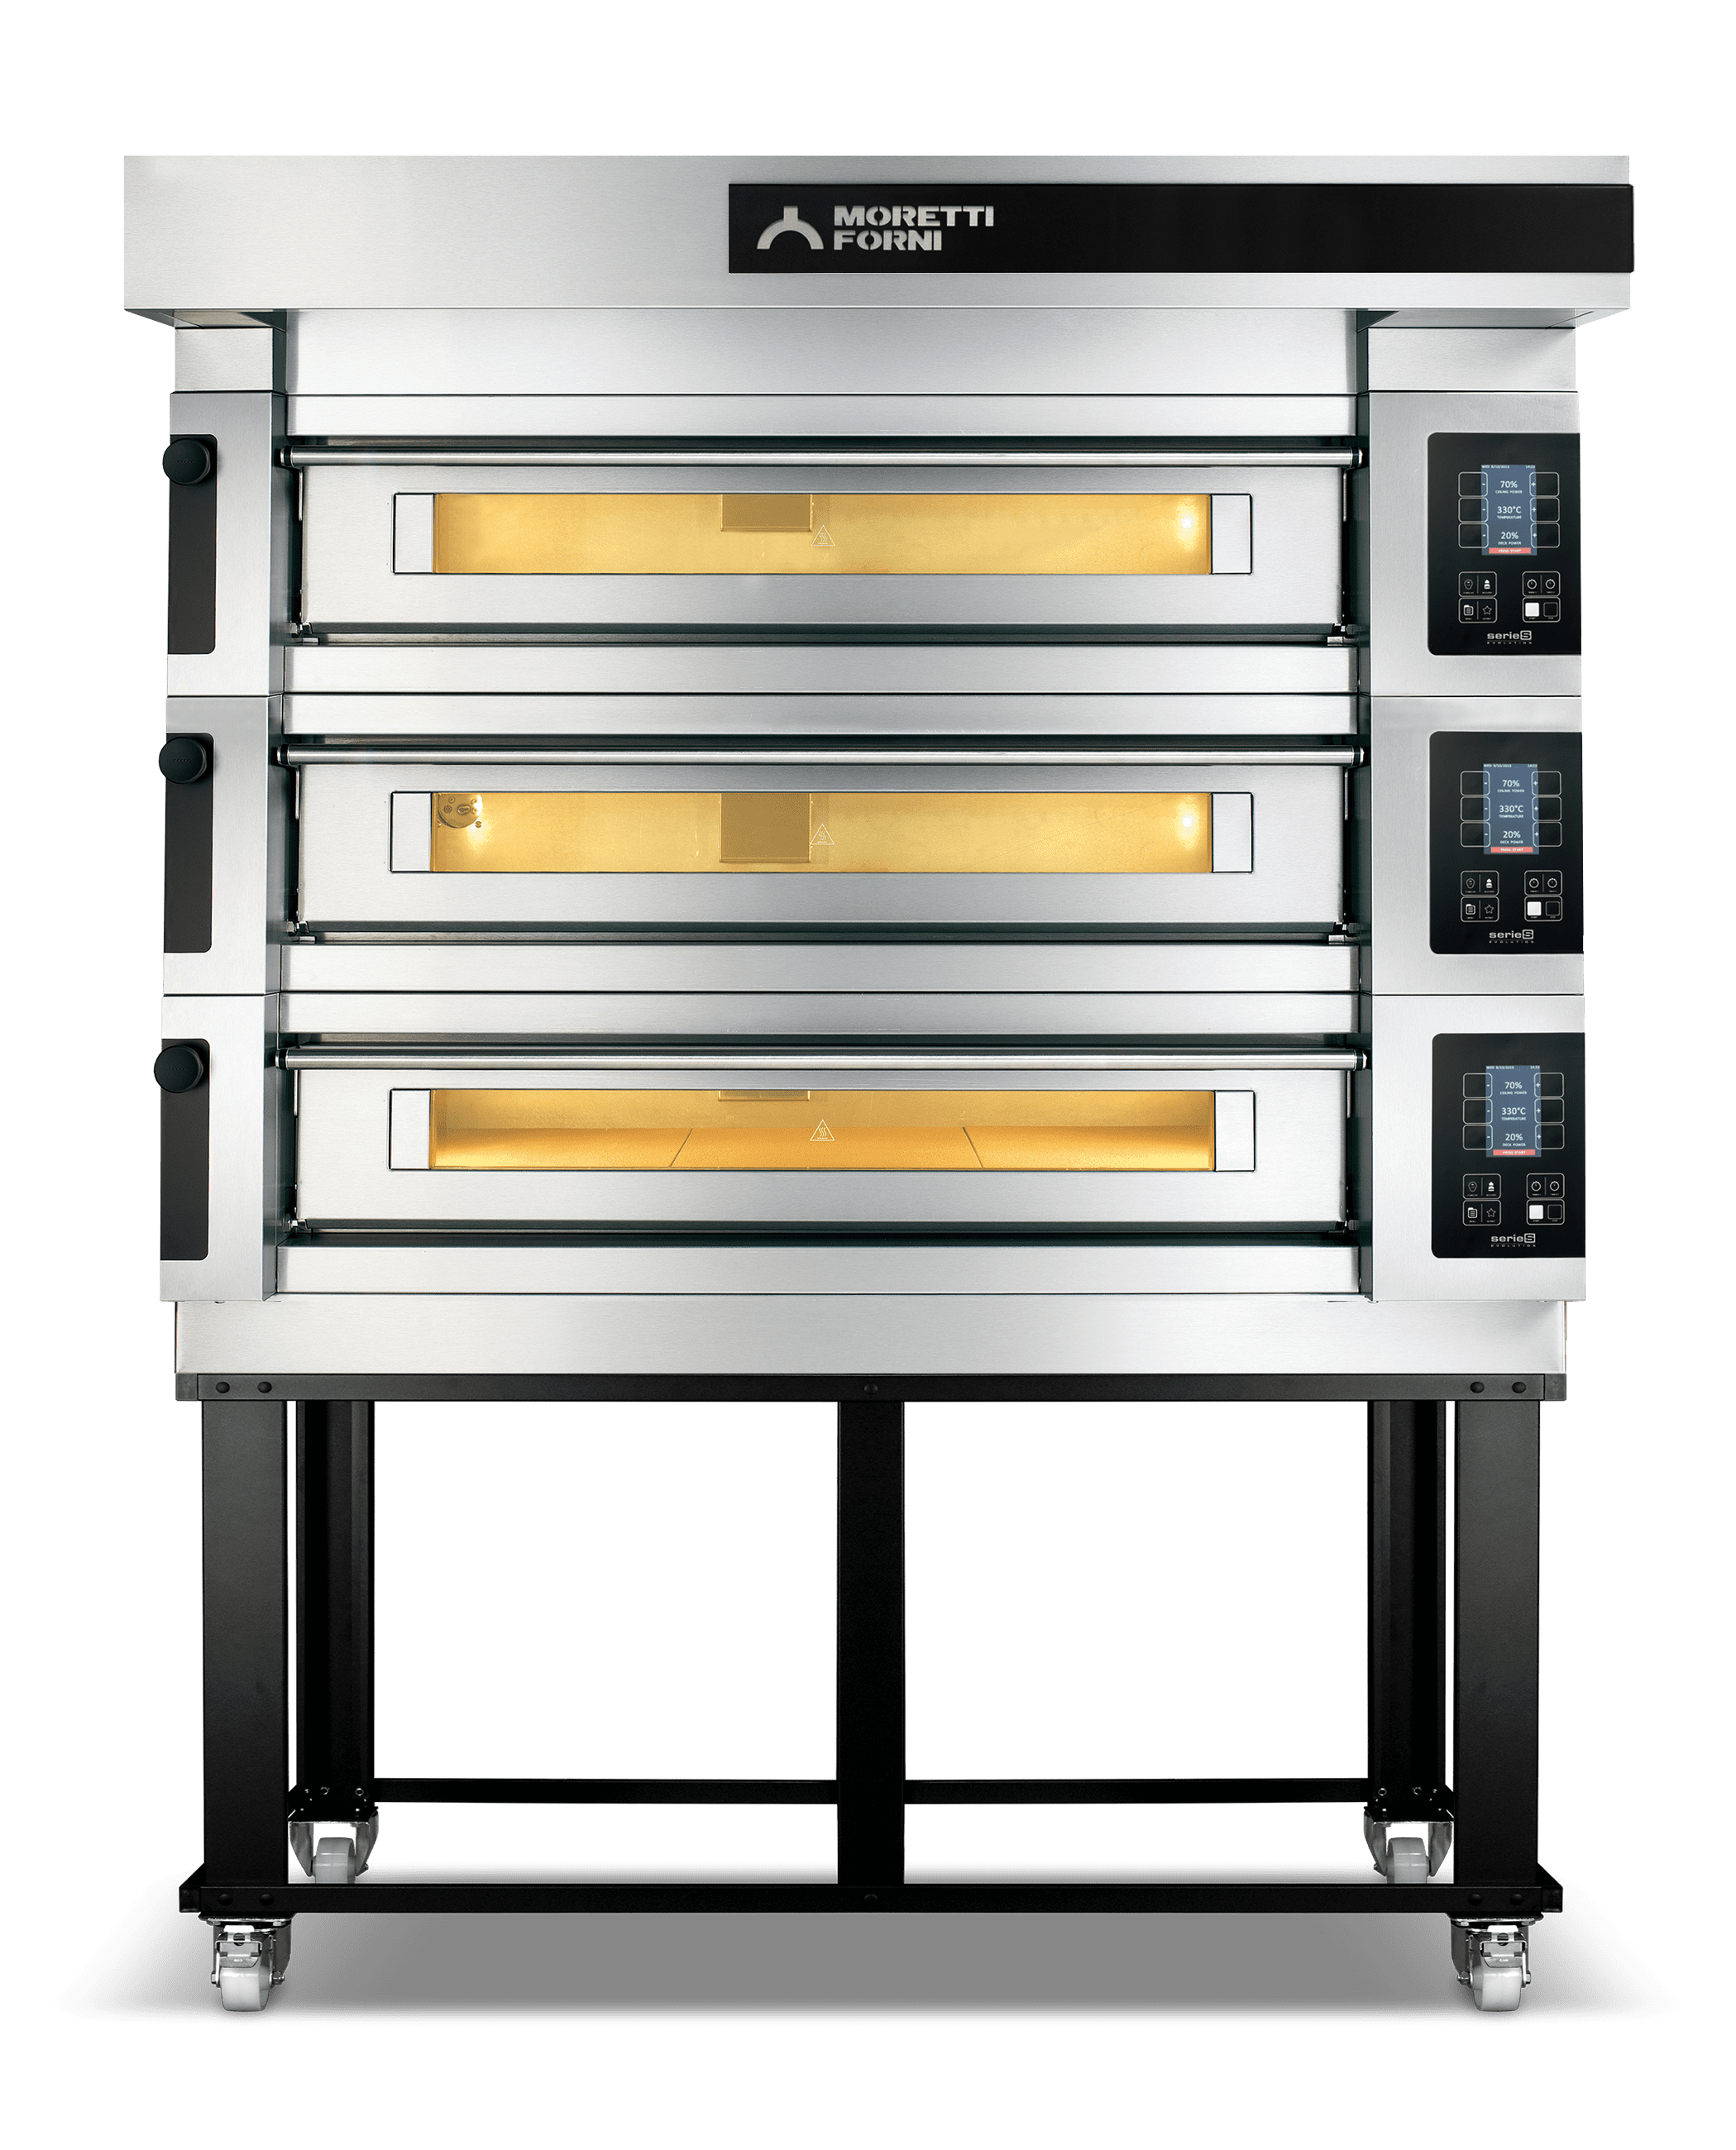 S125E3 - Serie S modular Electric Pizza oven 48-3/4"x49-1/2"x6-1/4" (Chamber)